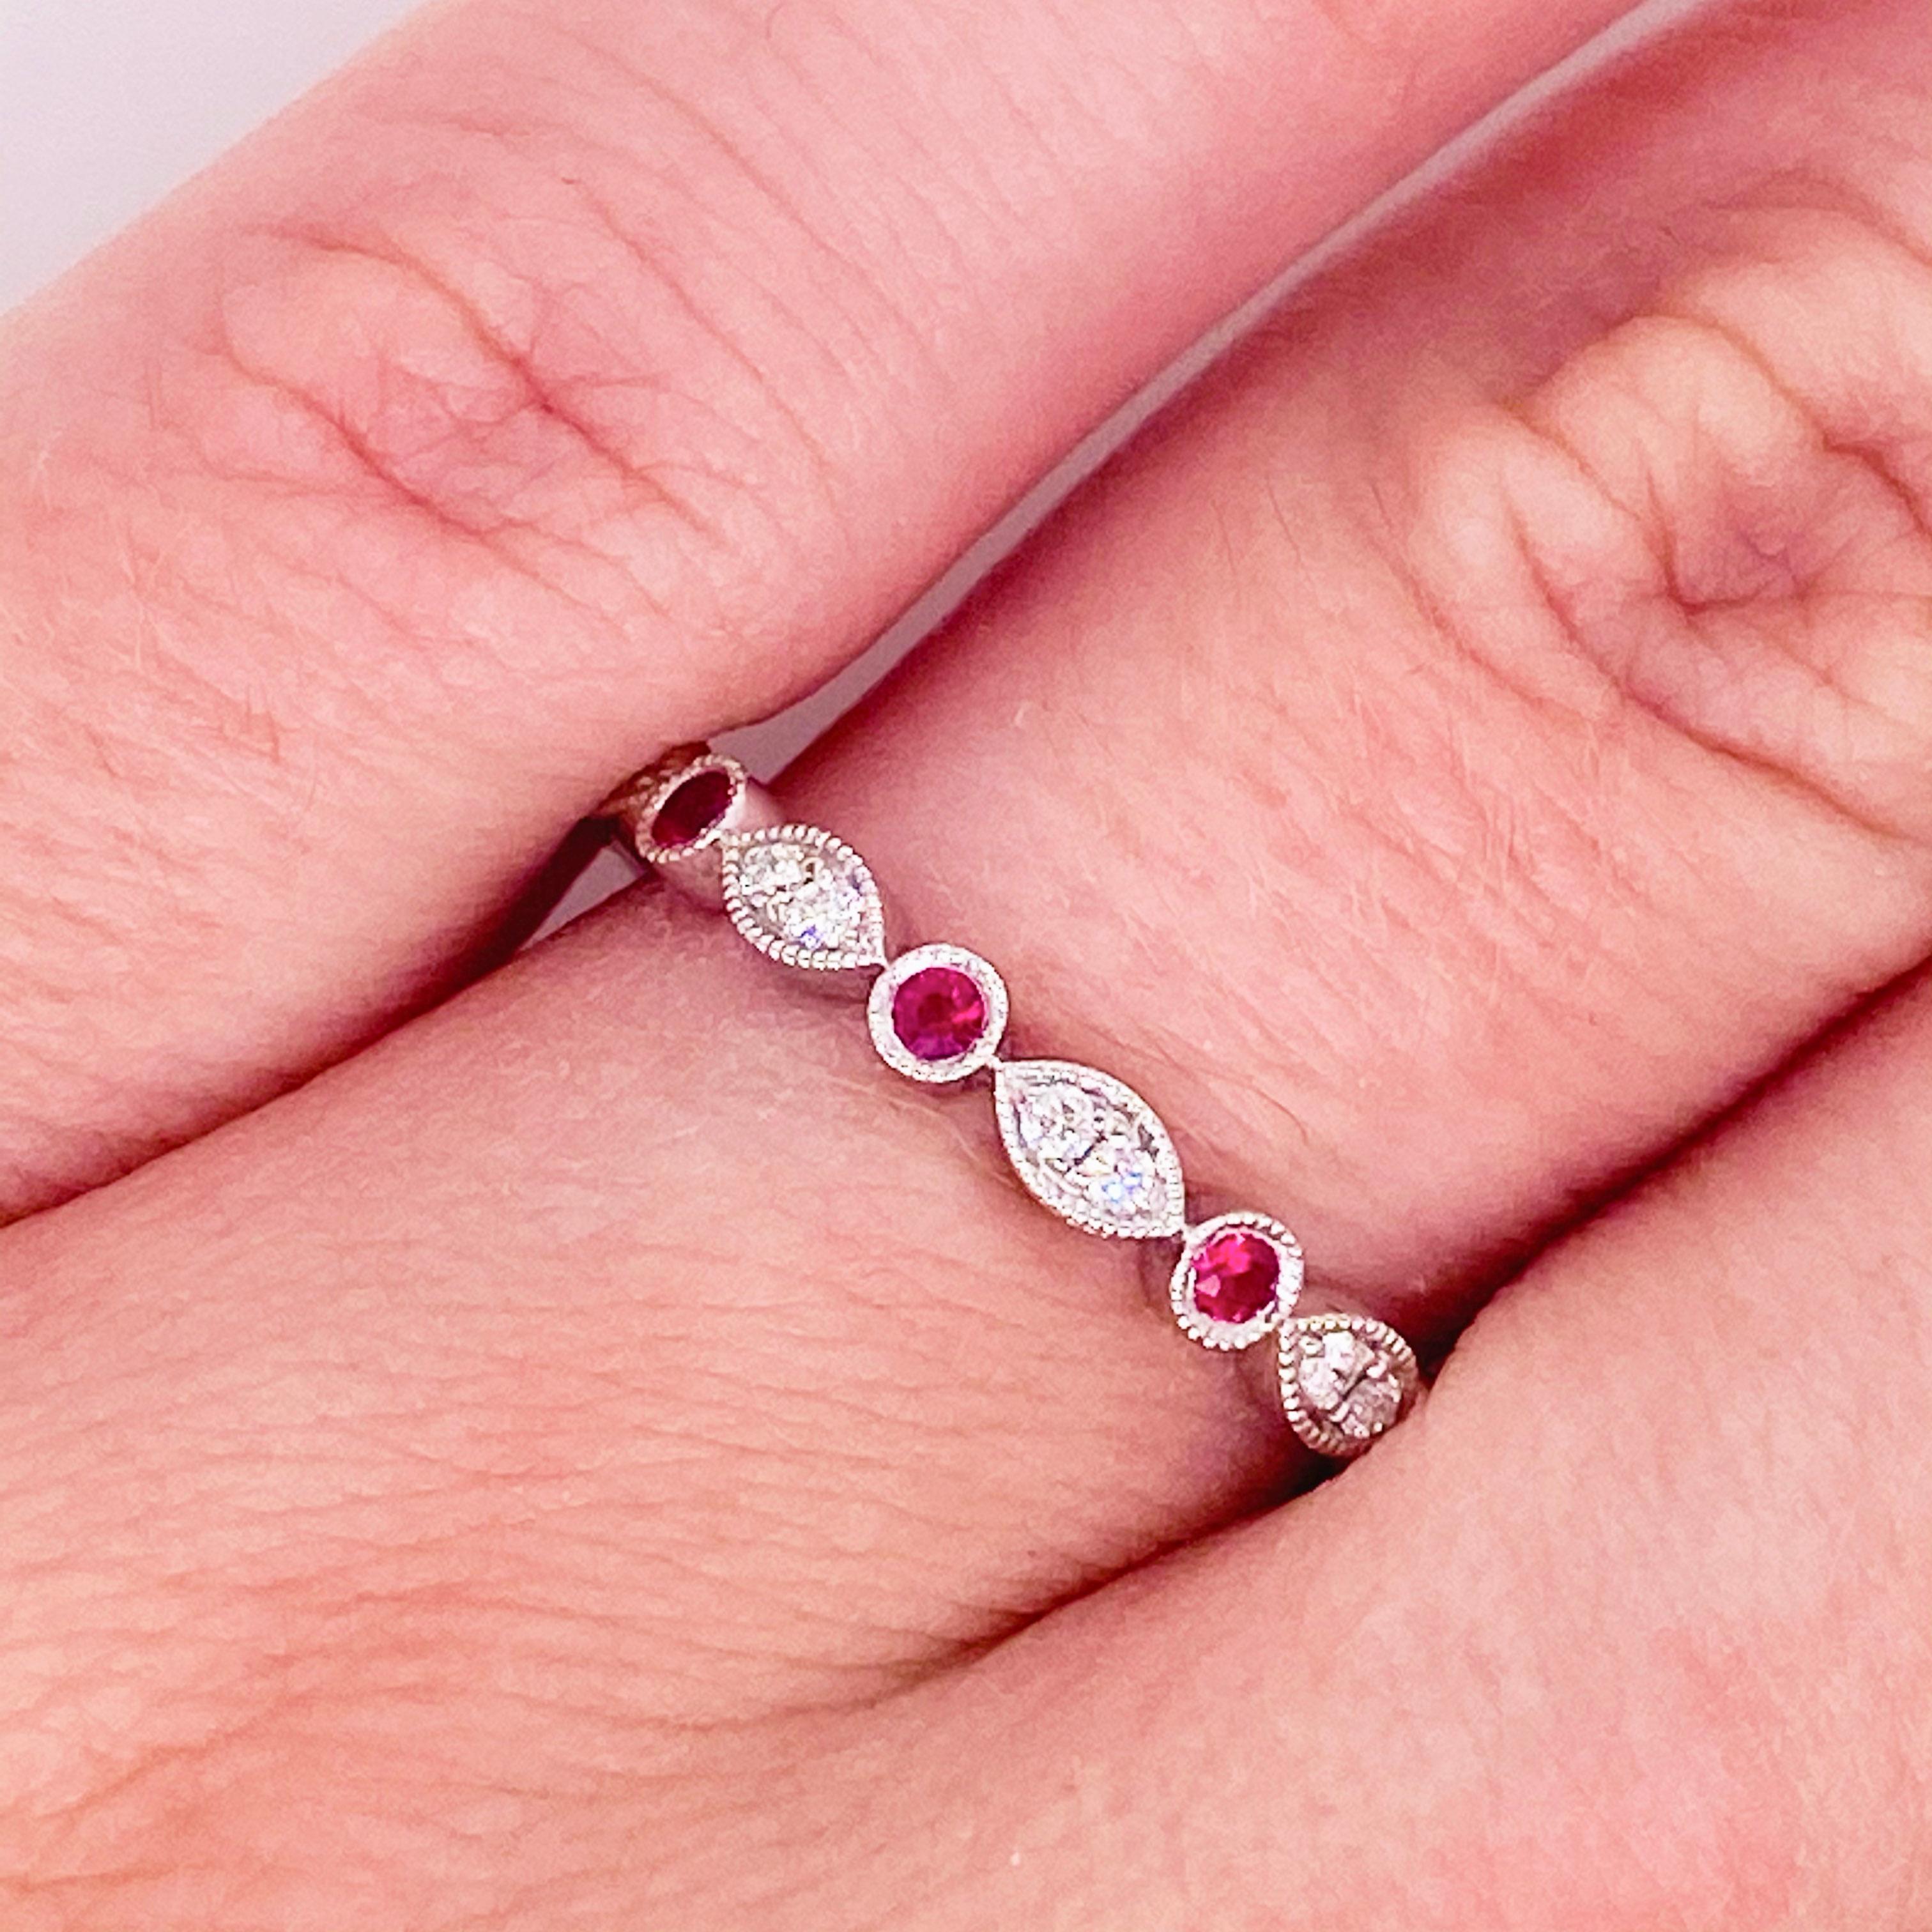 Would you like rubies to adorn your finger?  Would you like rubies to add to other stackable bands? If so, this is the band for you!  The marquise shape alternating with the round rubies is very striking!  The hand detail of hand engraved milgrain